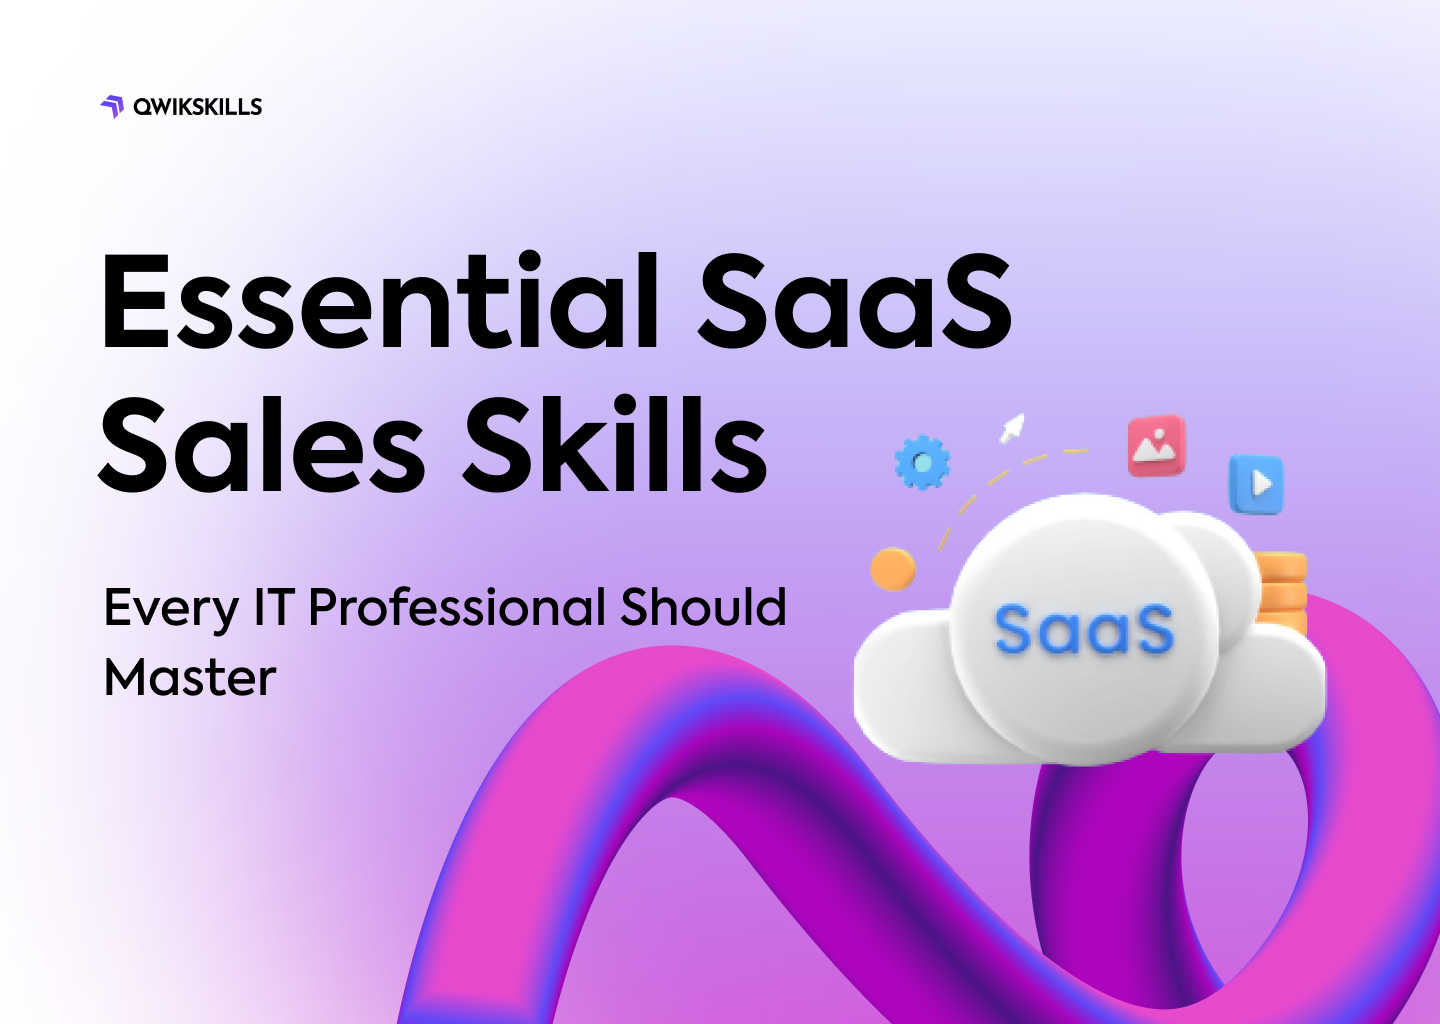 IT professional engaged in SaaS sales training, focusing on essential skills like communication, problem-solving, and technology expertise.